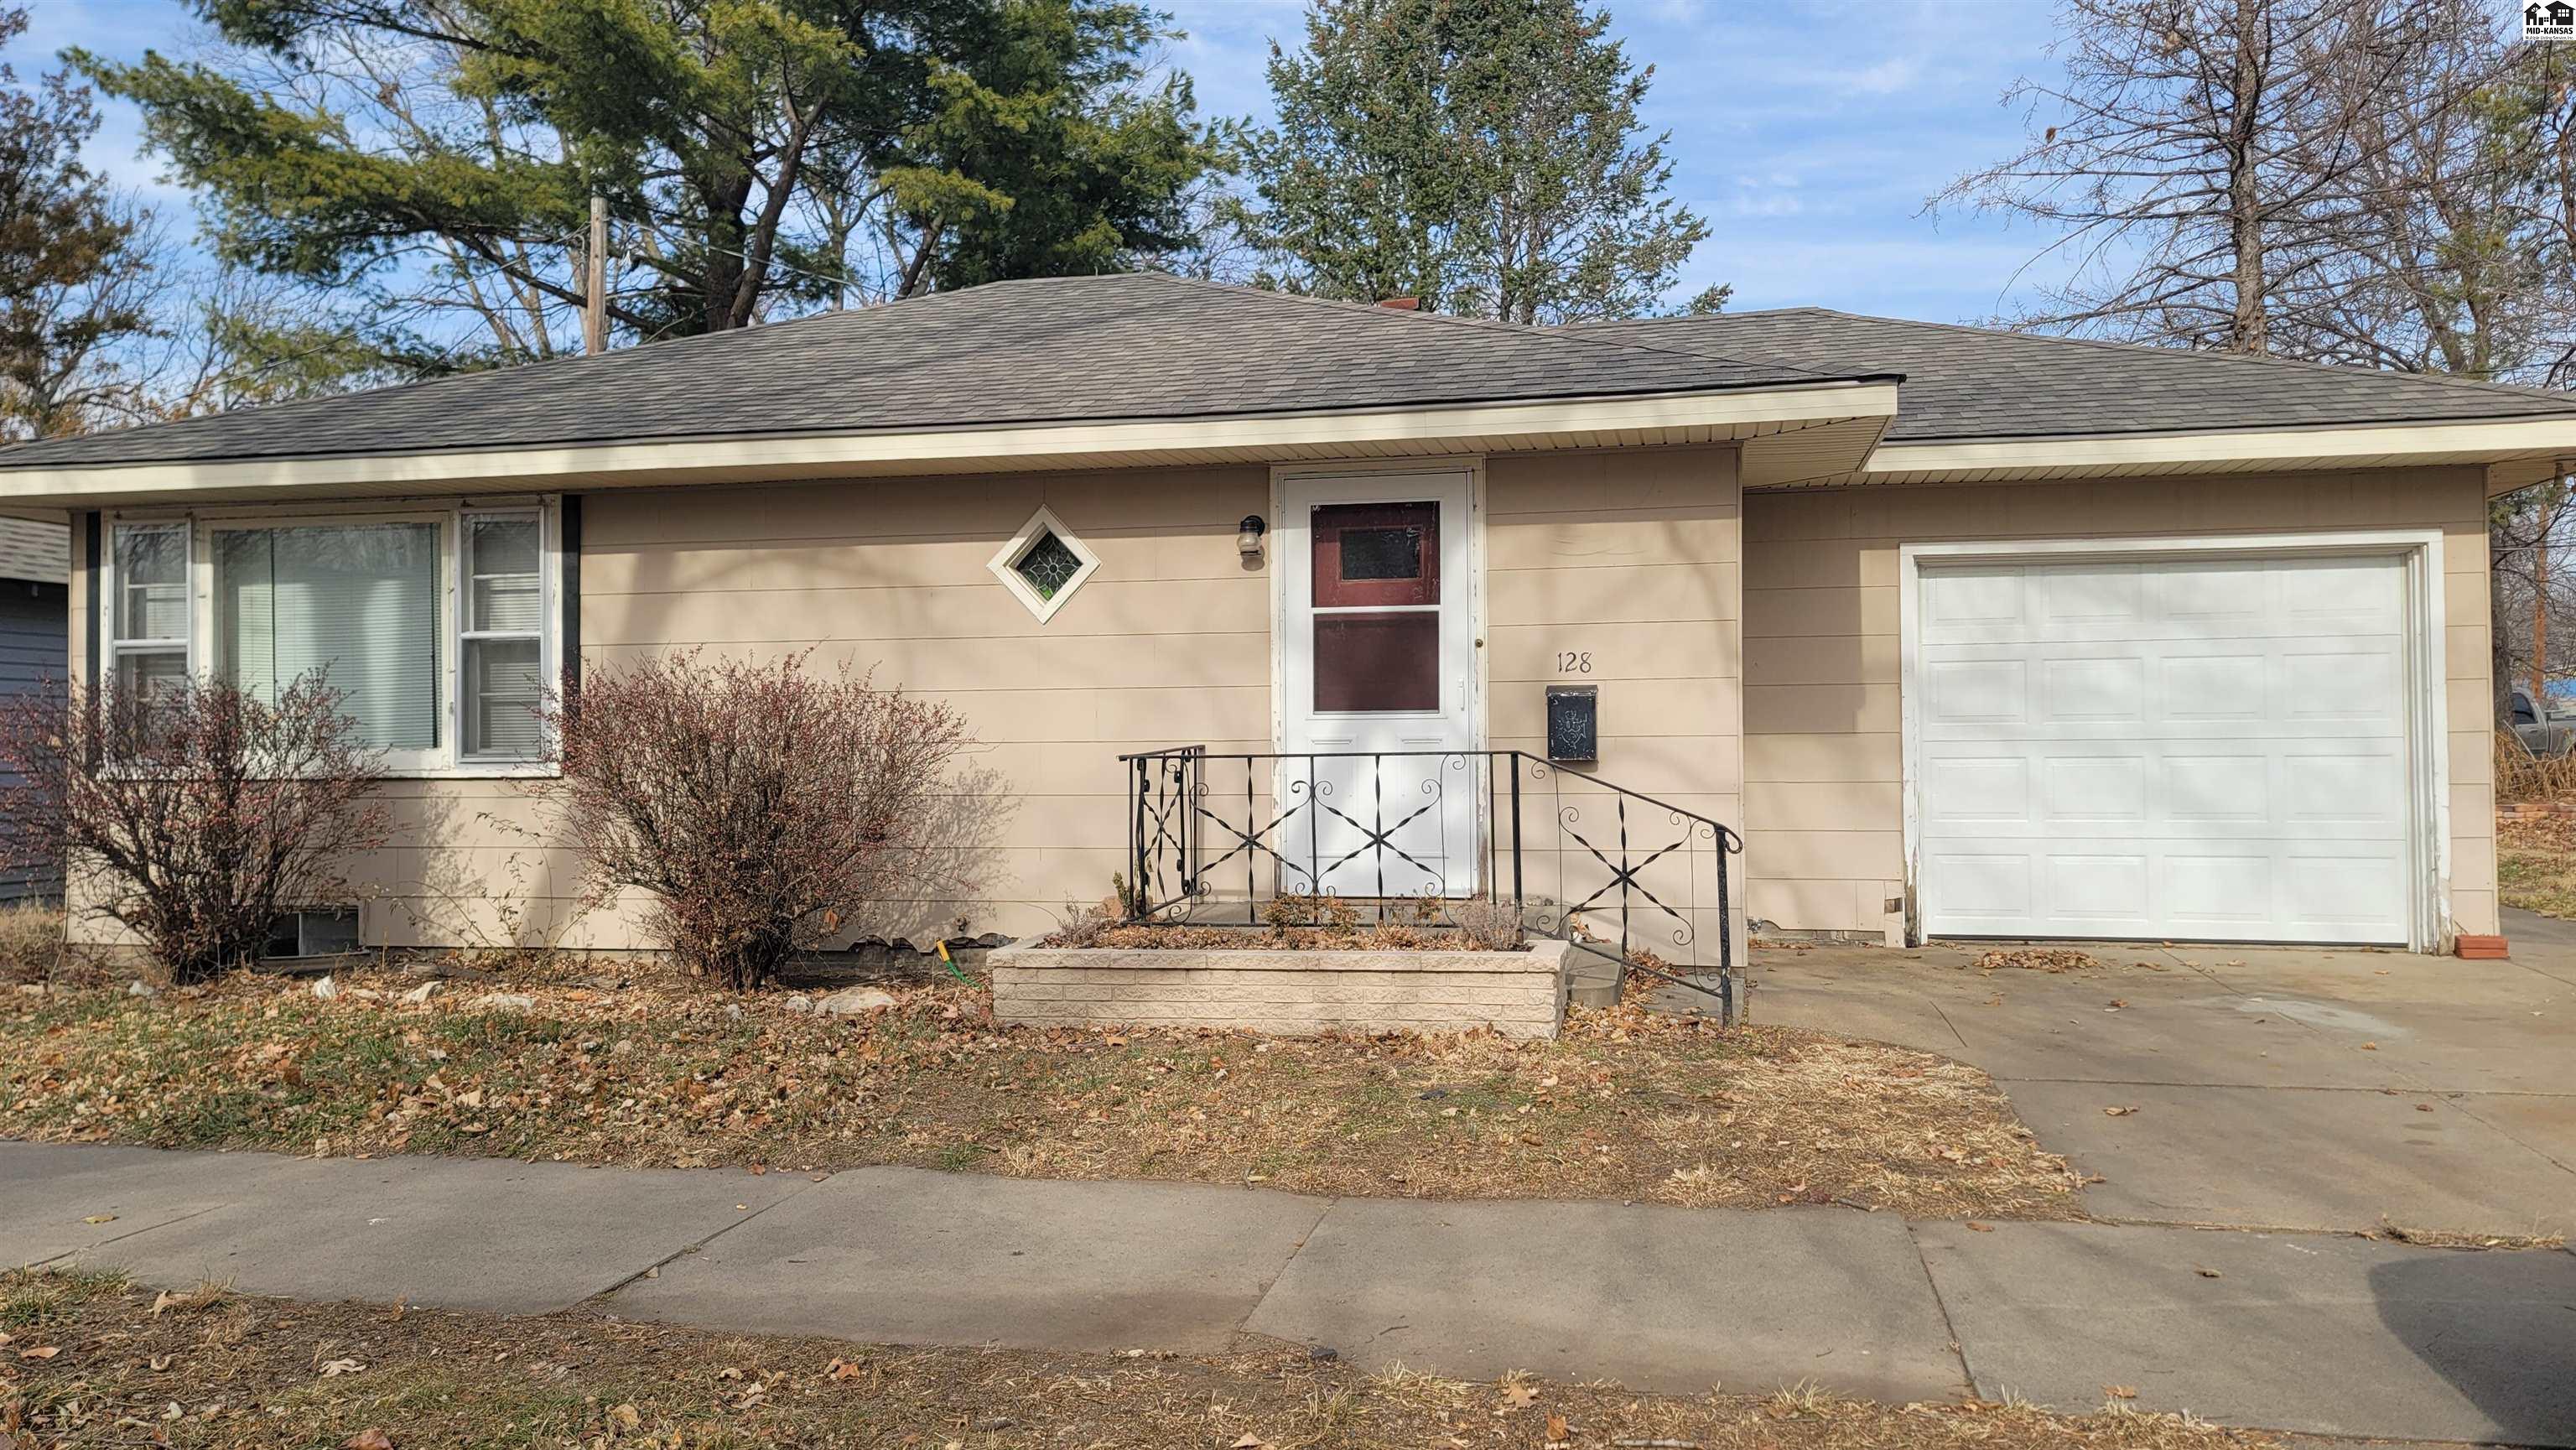 Downtown Lindsborg and the elementary school are just a minutes walk away when you live in this charming little rancher. Cute as a button and ready for your updates to make it stunning. "AS IS" SALE with seller not making any improvements